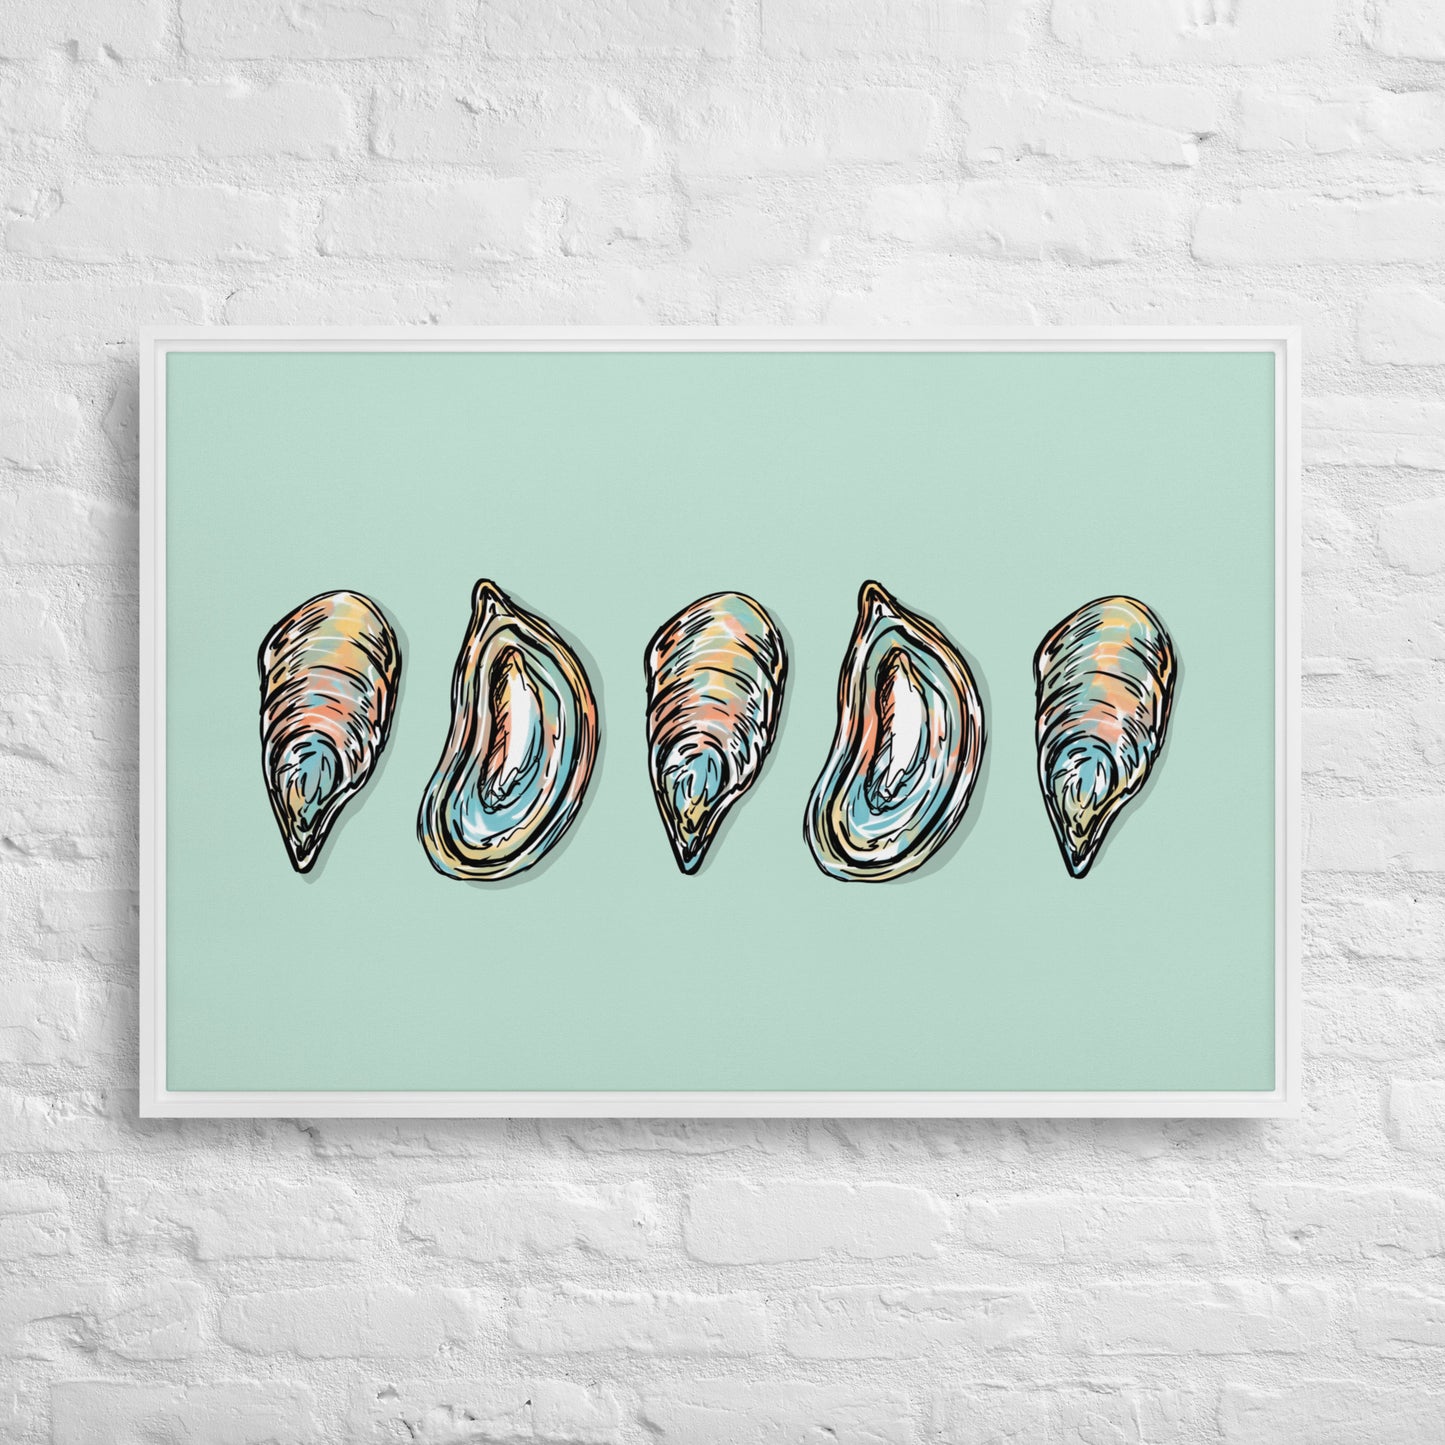 Oysters Framed Canvas Print